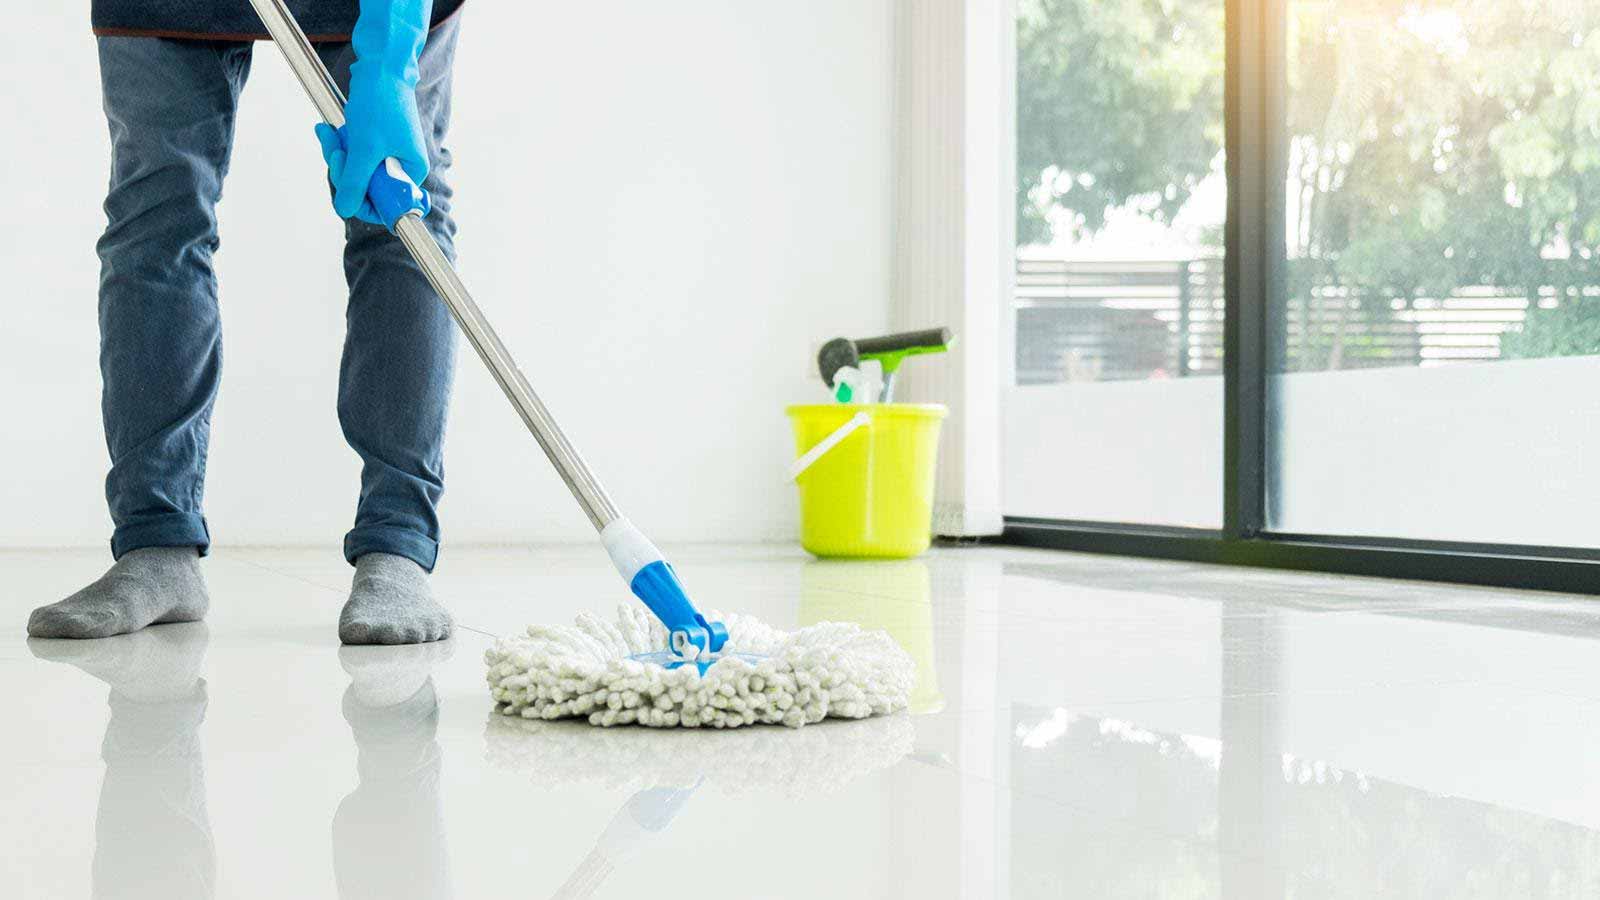 End Of Lease Cleaning Tips: Get Your Deposit Back In Full